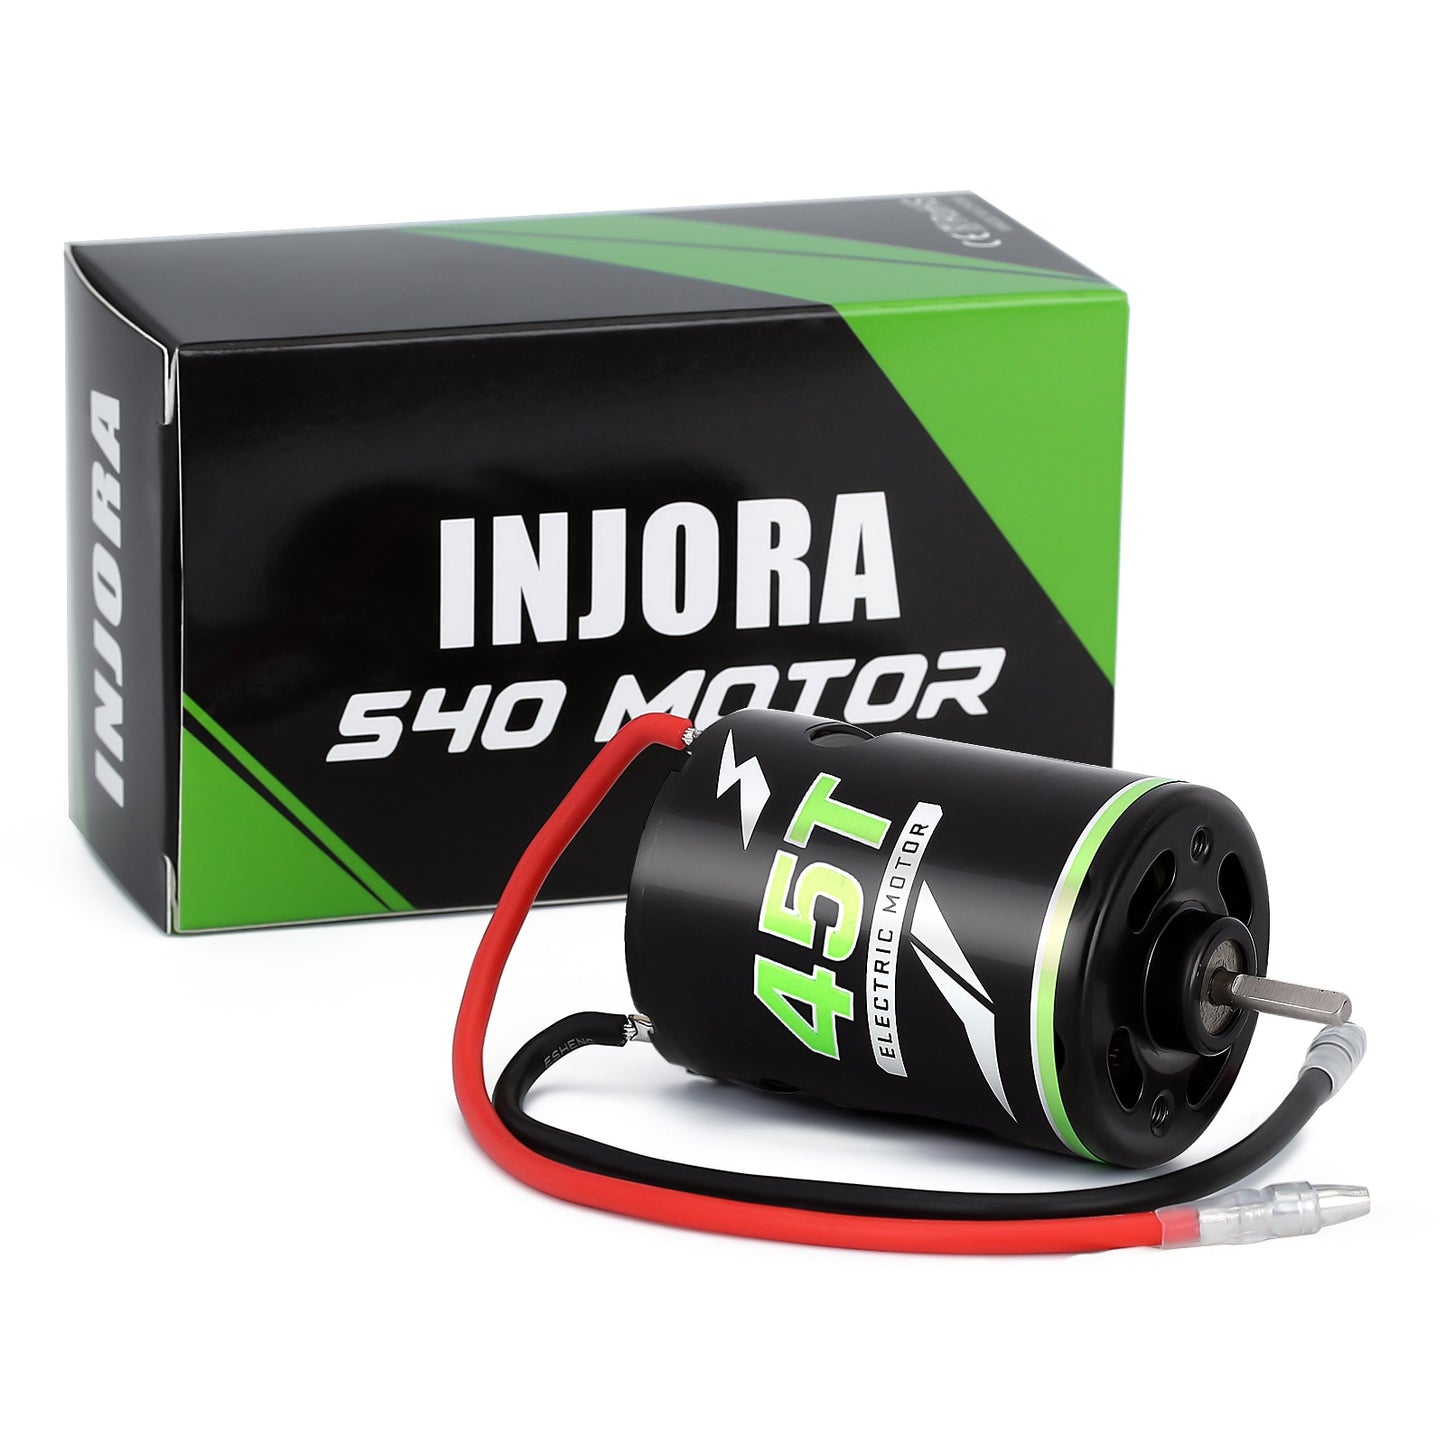 INJORA 20T 27T 35T 45T 540 Brushed Motor Waterproof for 1:10 RC Crawler Axial SCX10 AXI03007 90046 TRX4 Car Boat Parts